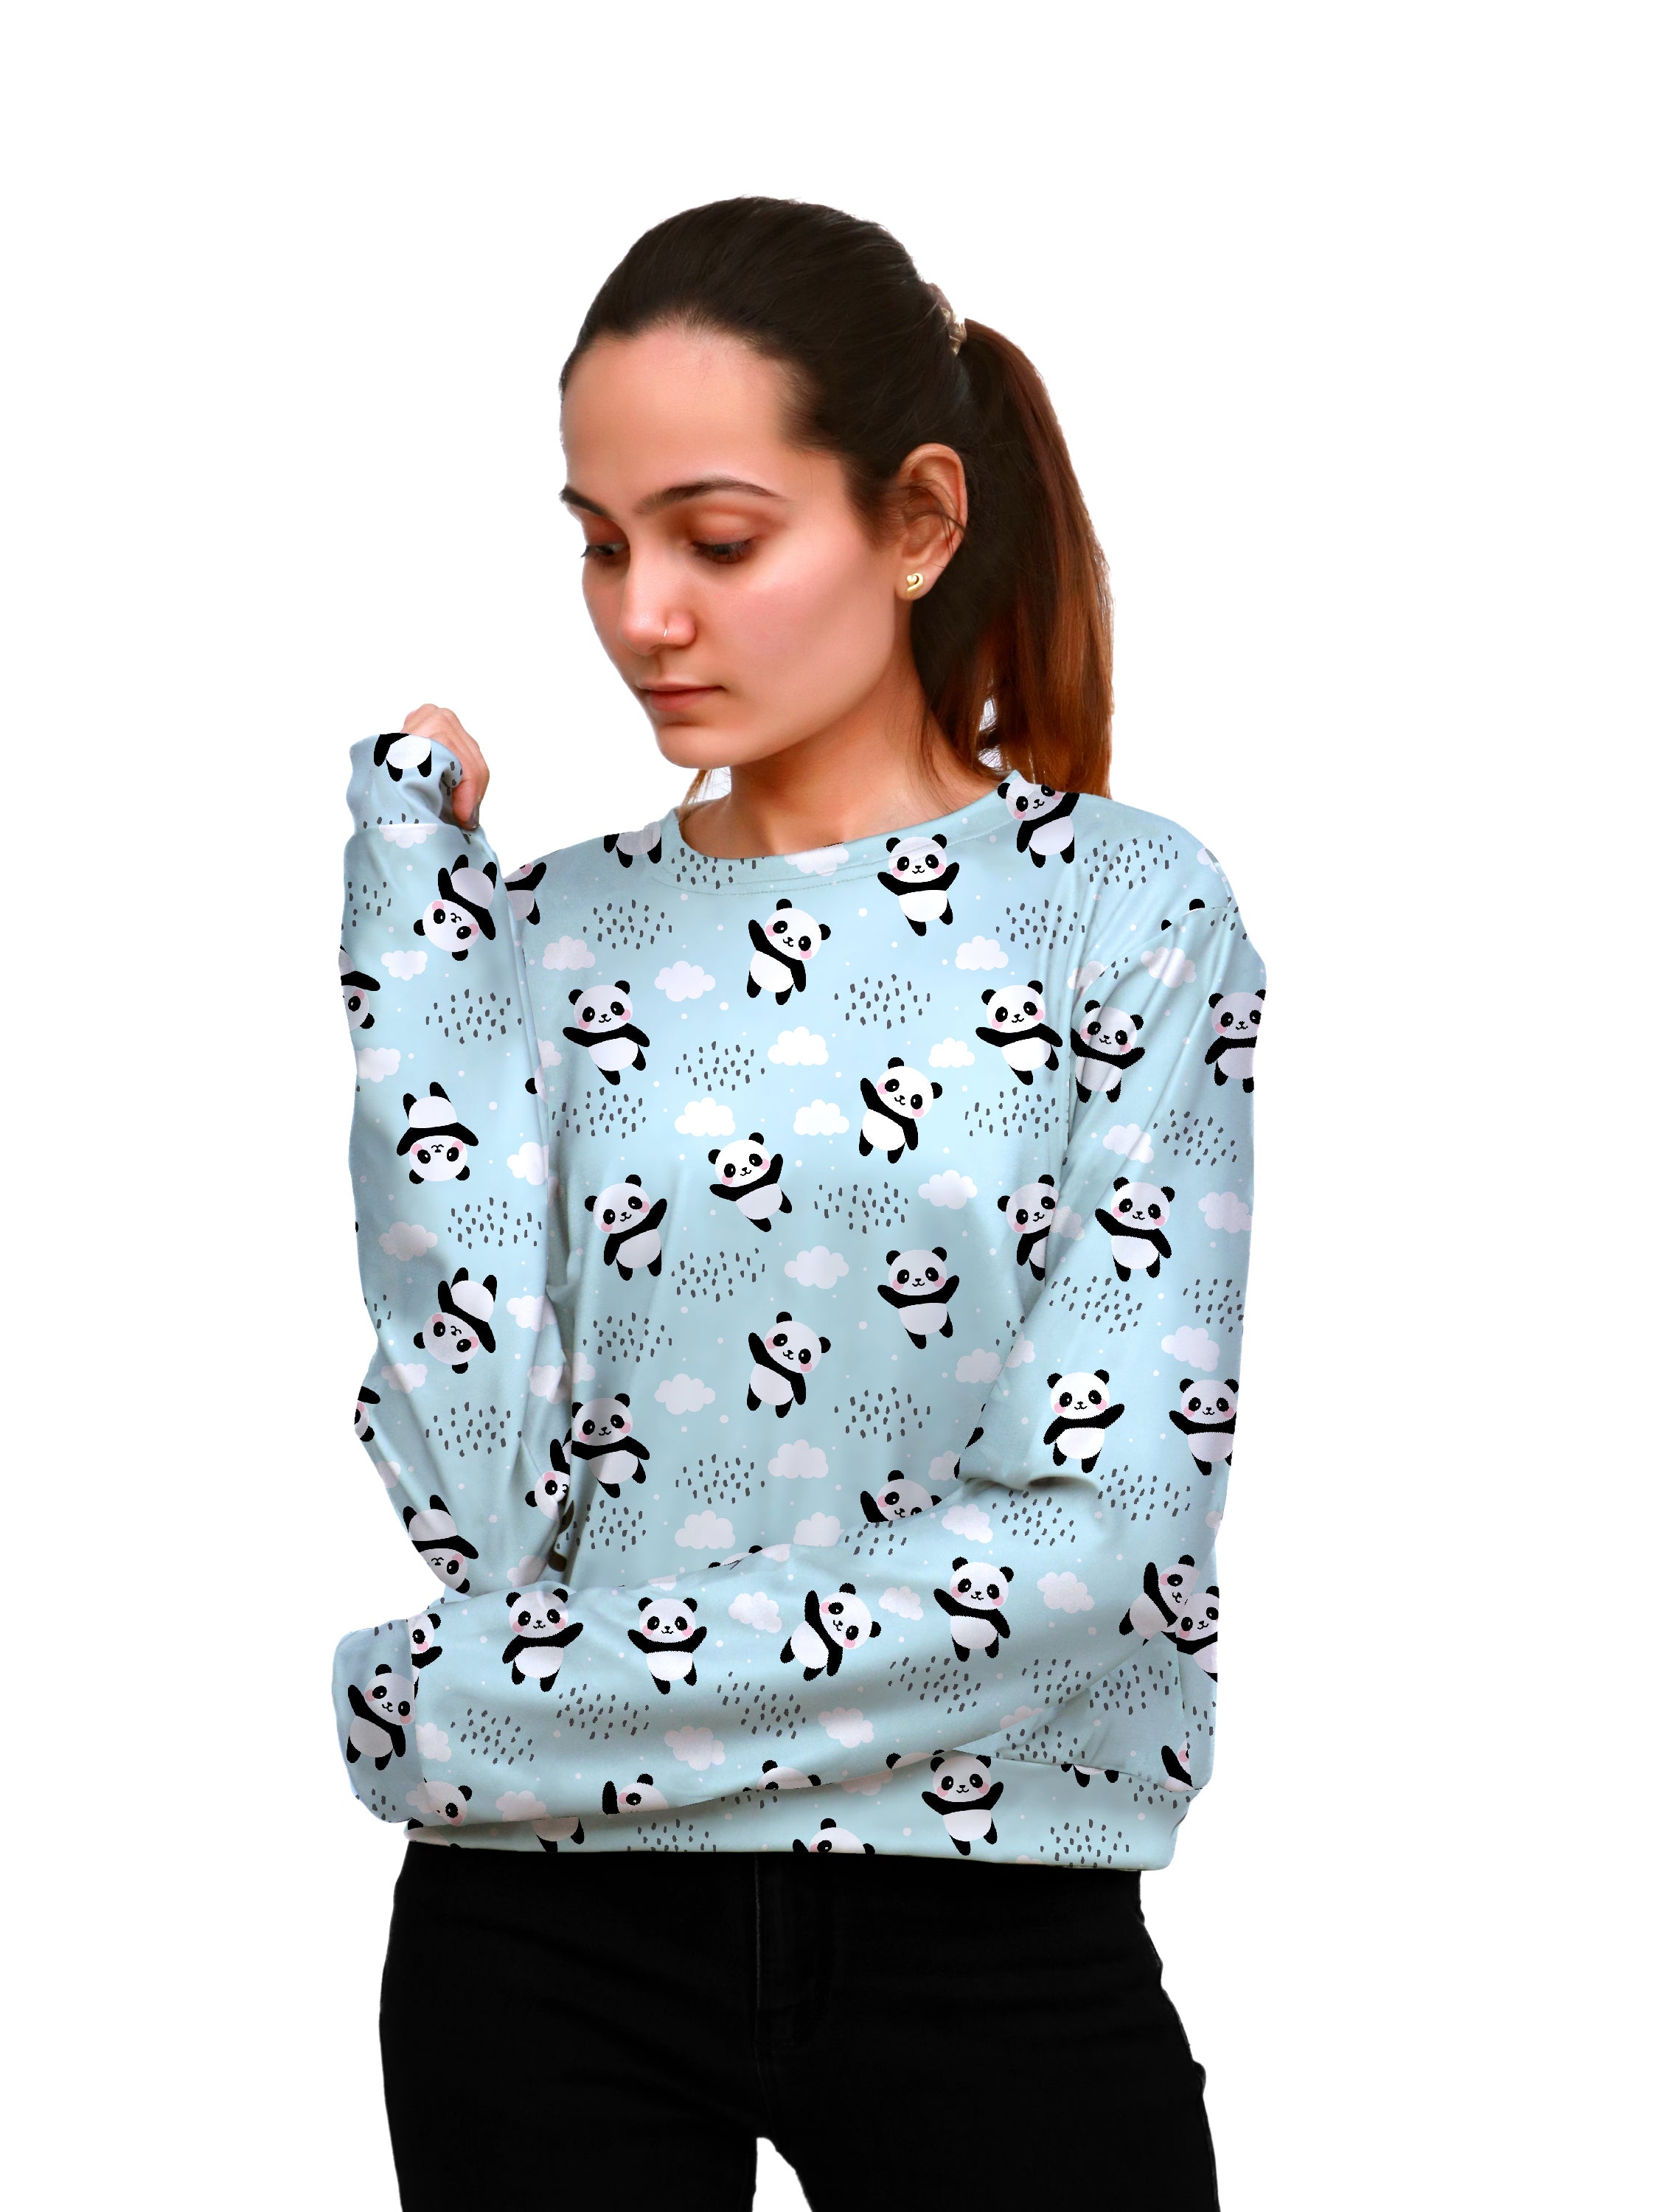 Light Sky-Blue Top With Panda Print for a Whimsical Touch